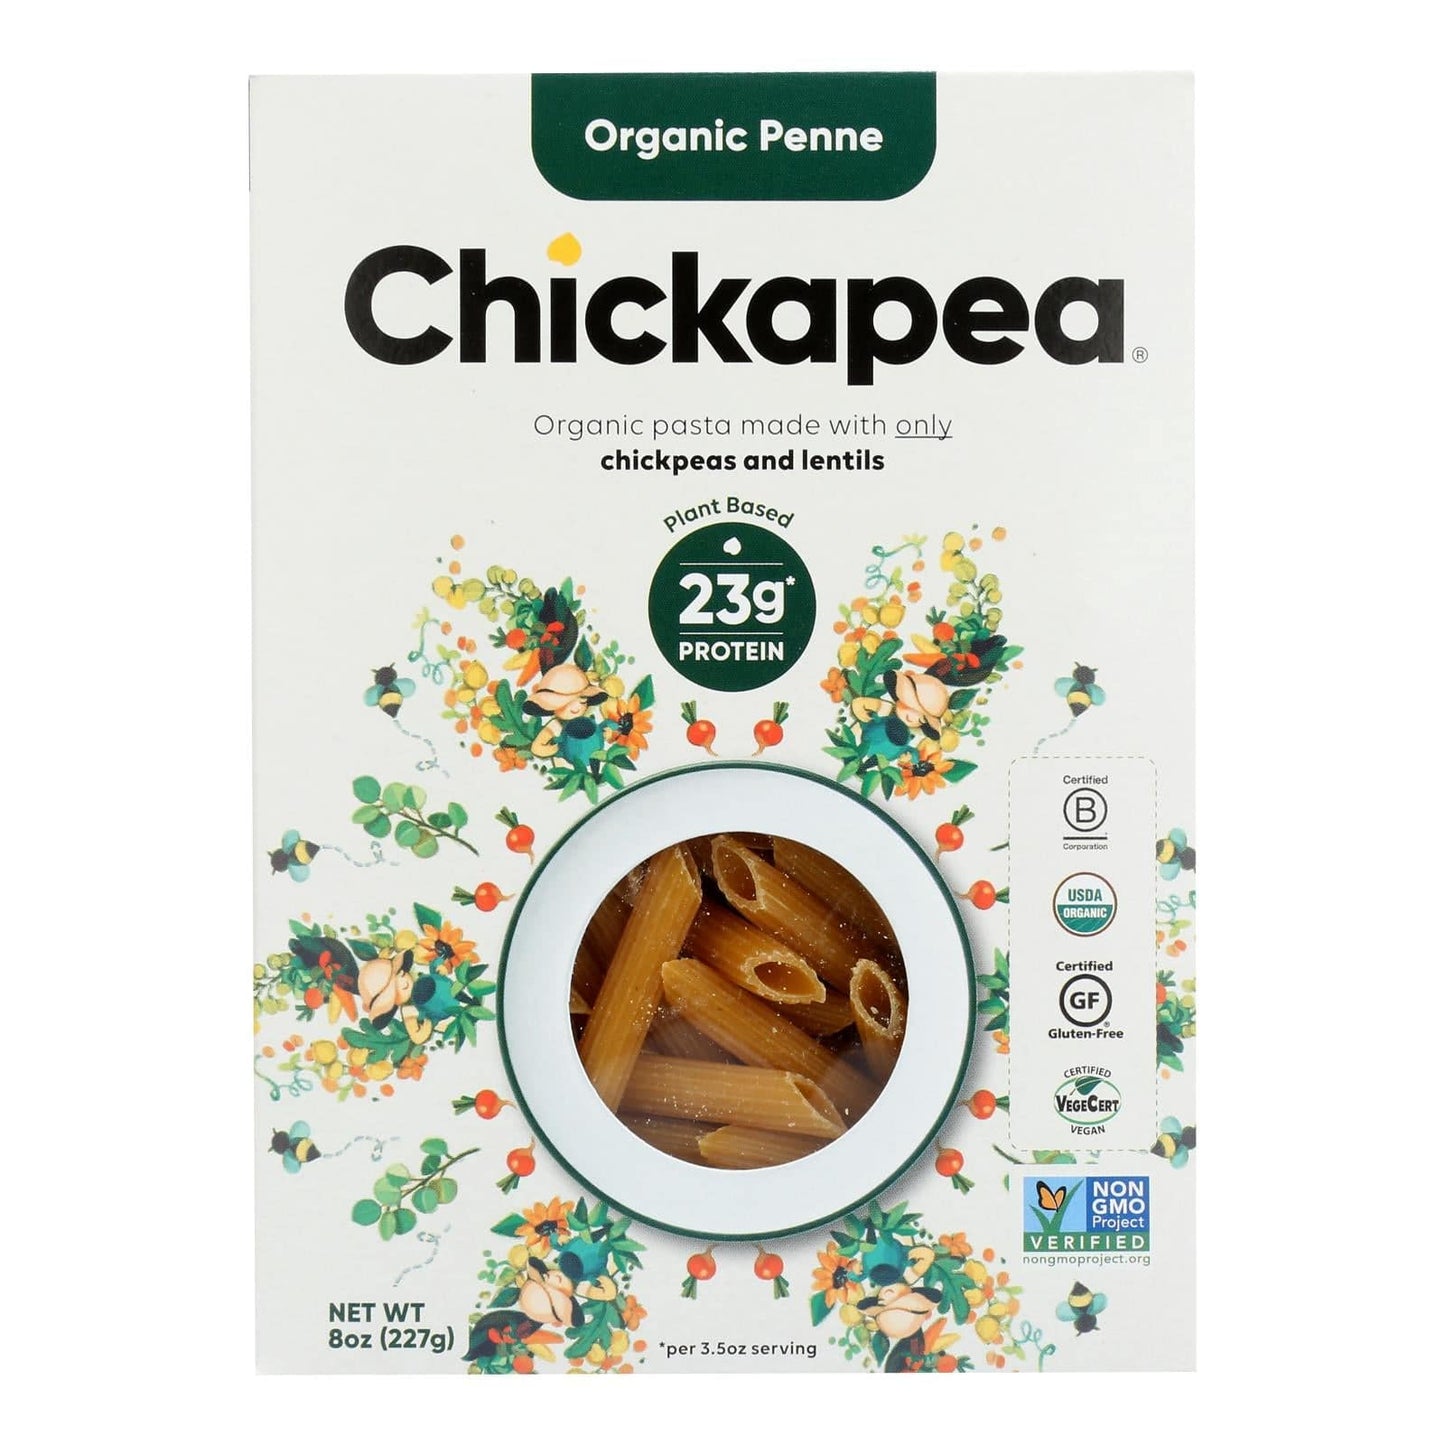 Buy Chickapea Pasta - Pasta - Penne - Case Of 6 - 8 Oz.  at OnlyNaturals.us